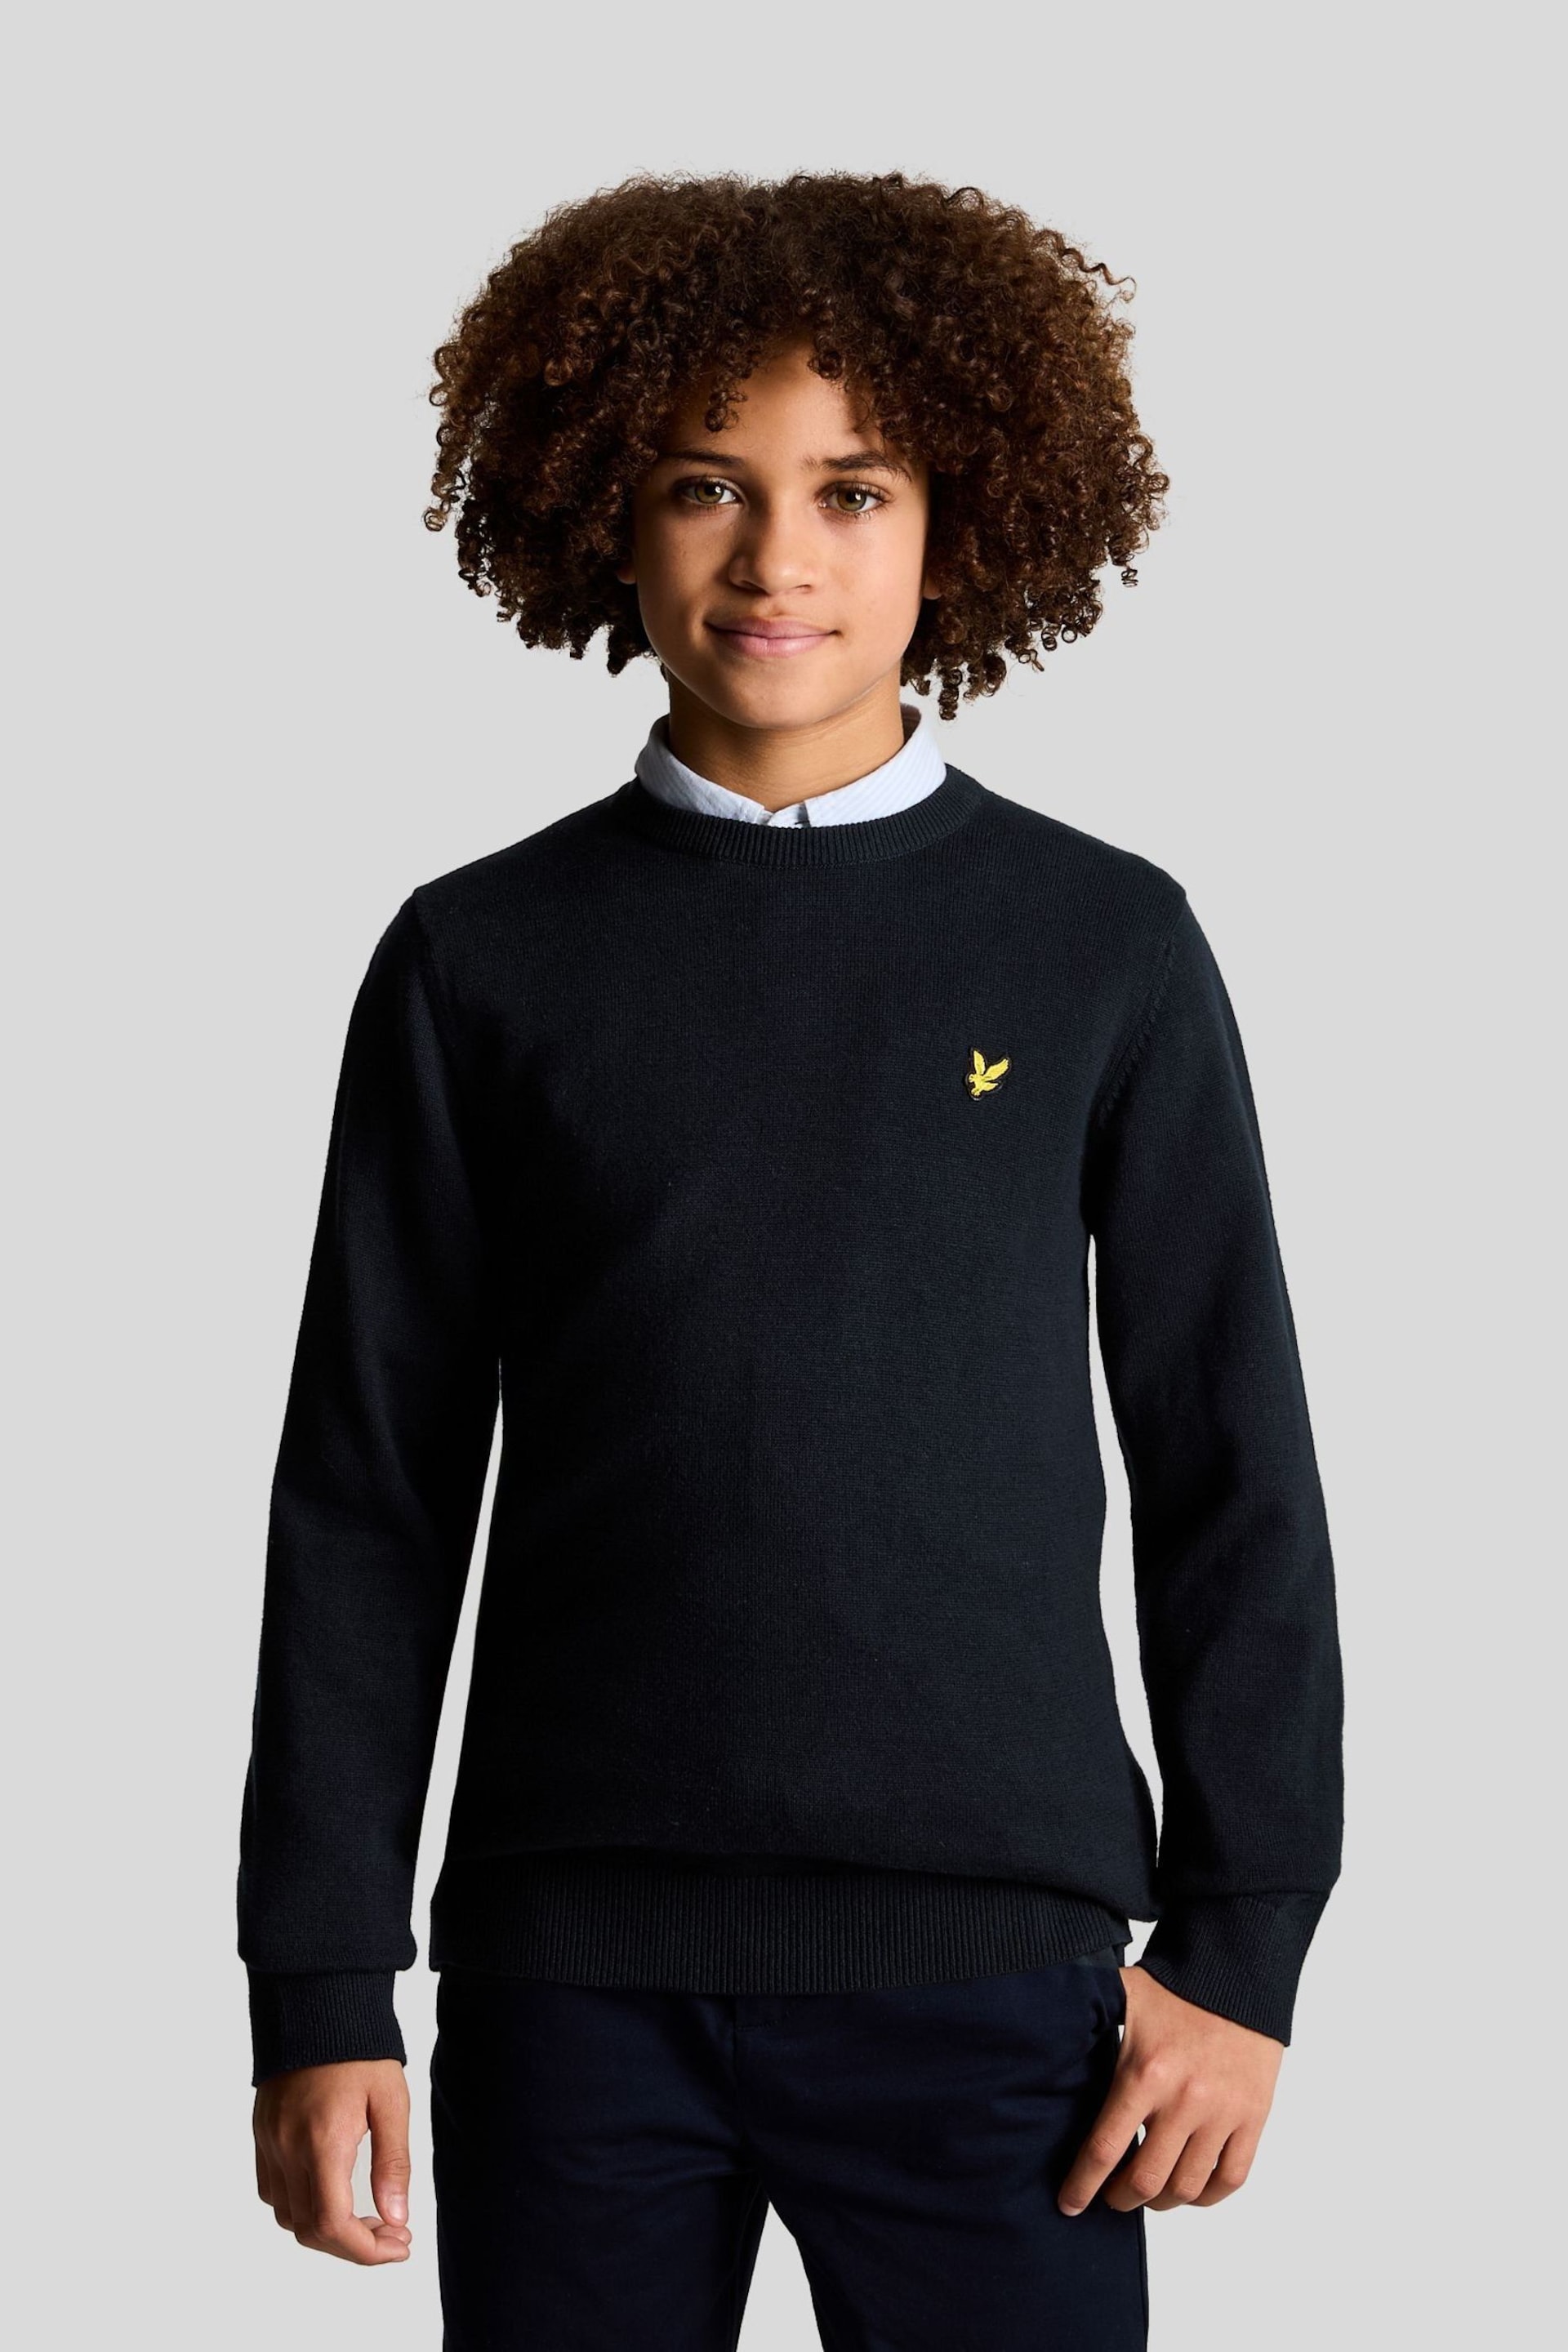 Lyle & Scott Boys Cotton Crew Neck Knitted Jumper - Image 1 of 3